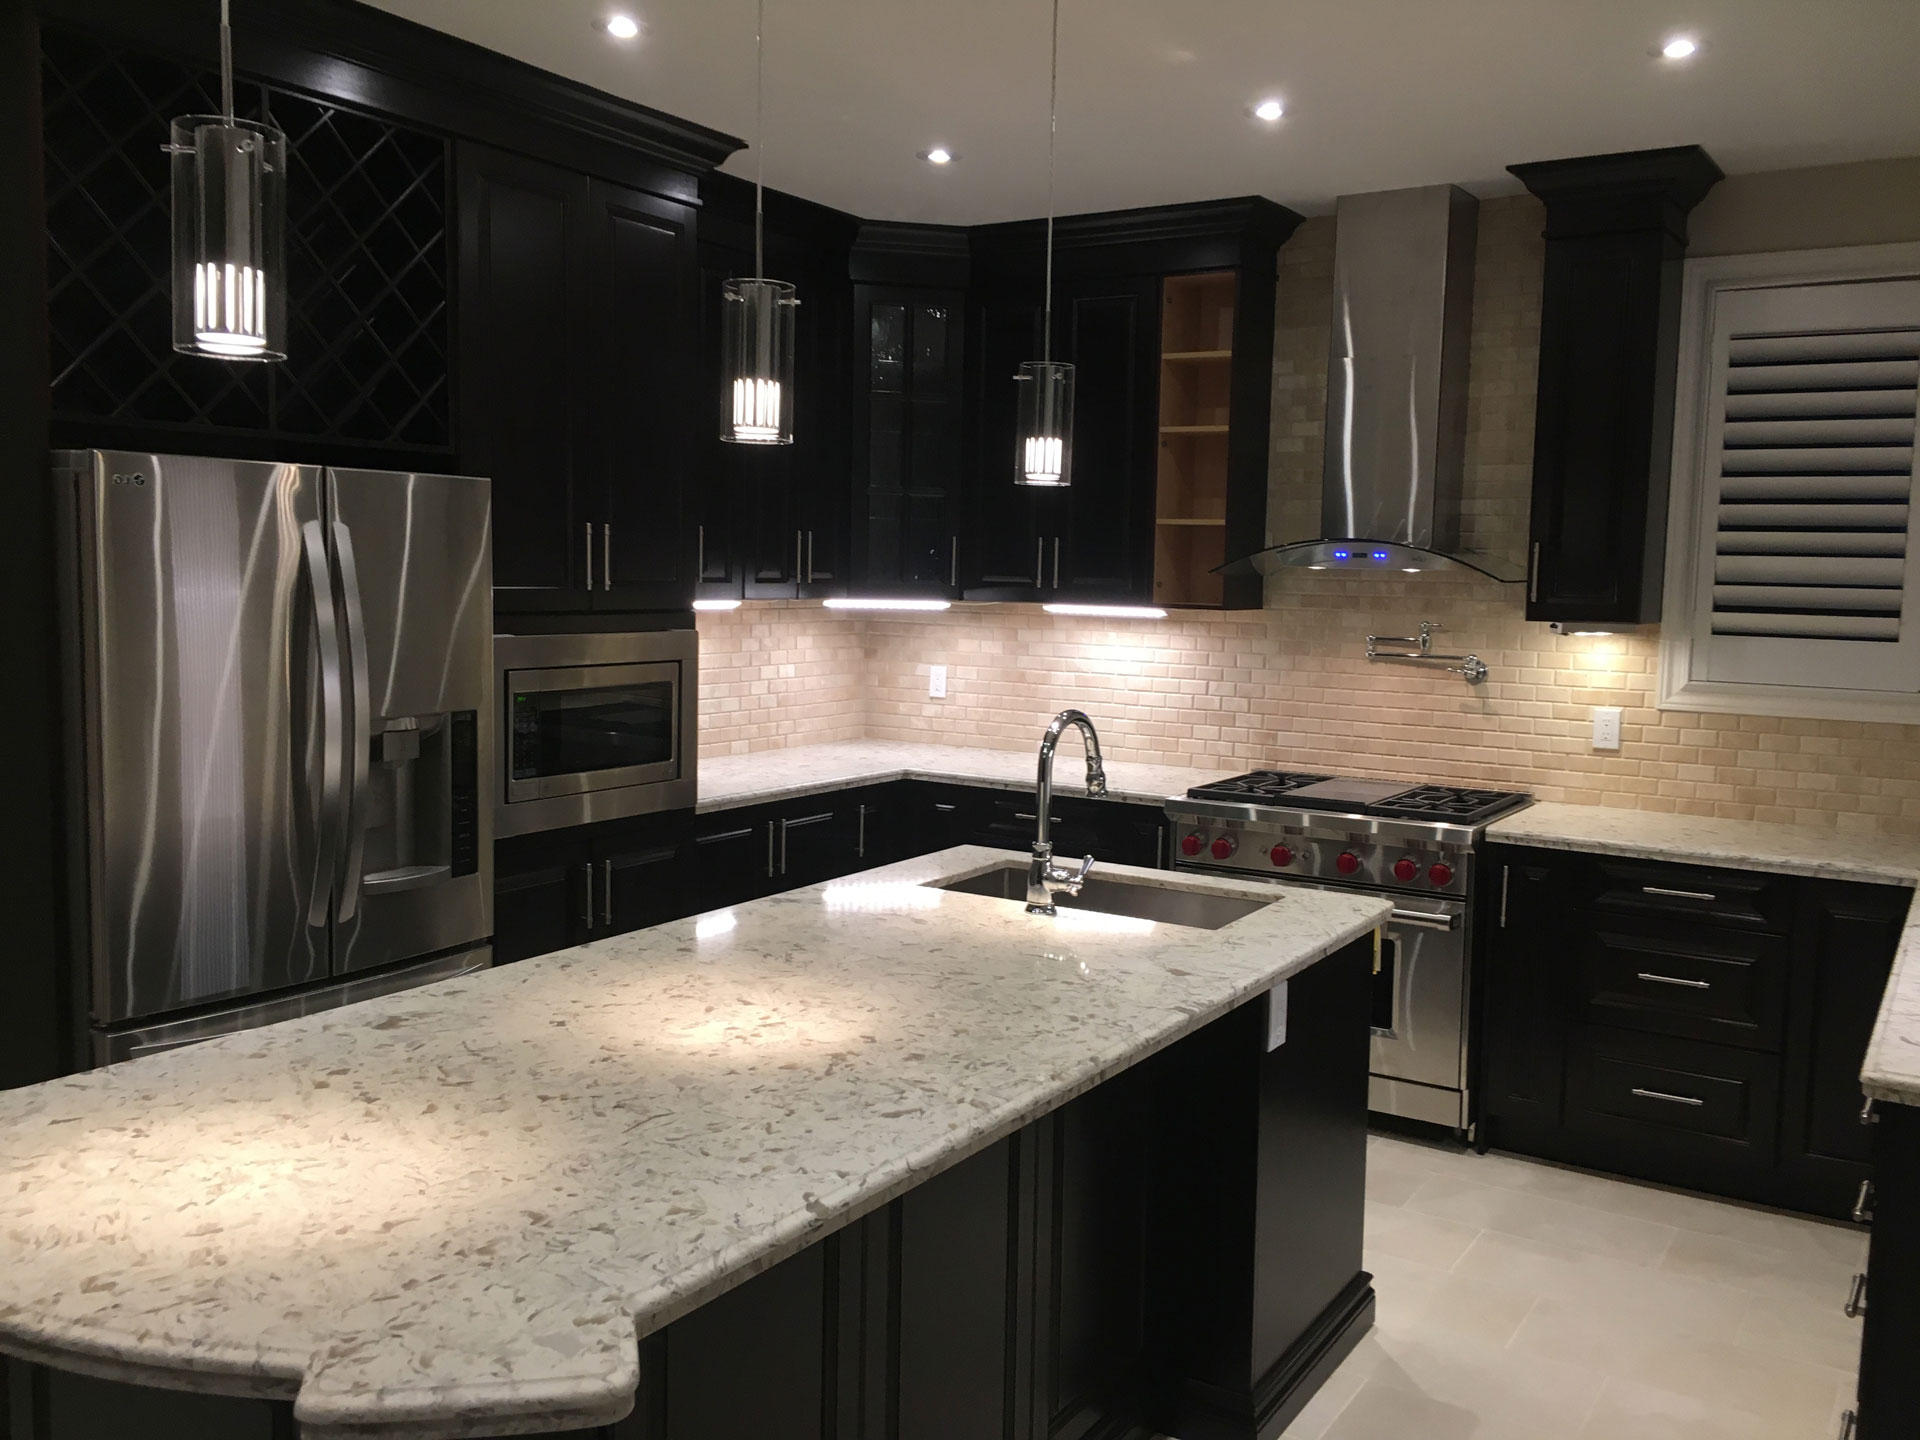 Kitchen Cabinetry Trends 2019 Sharp Cabinetry